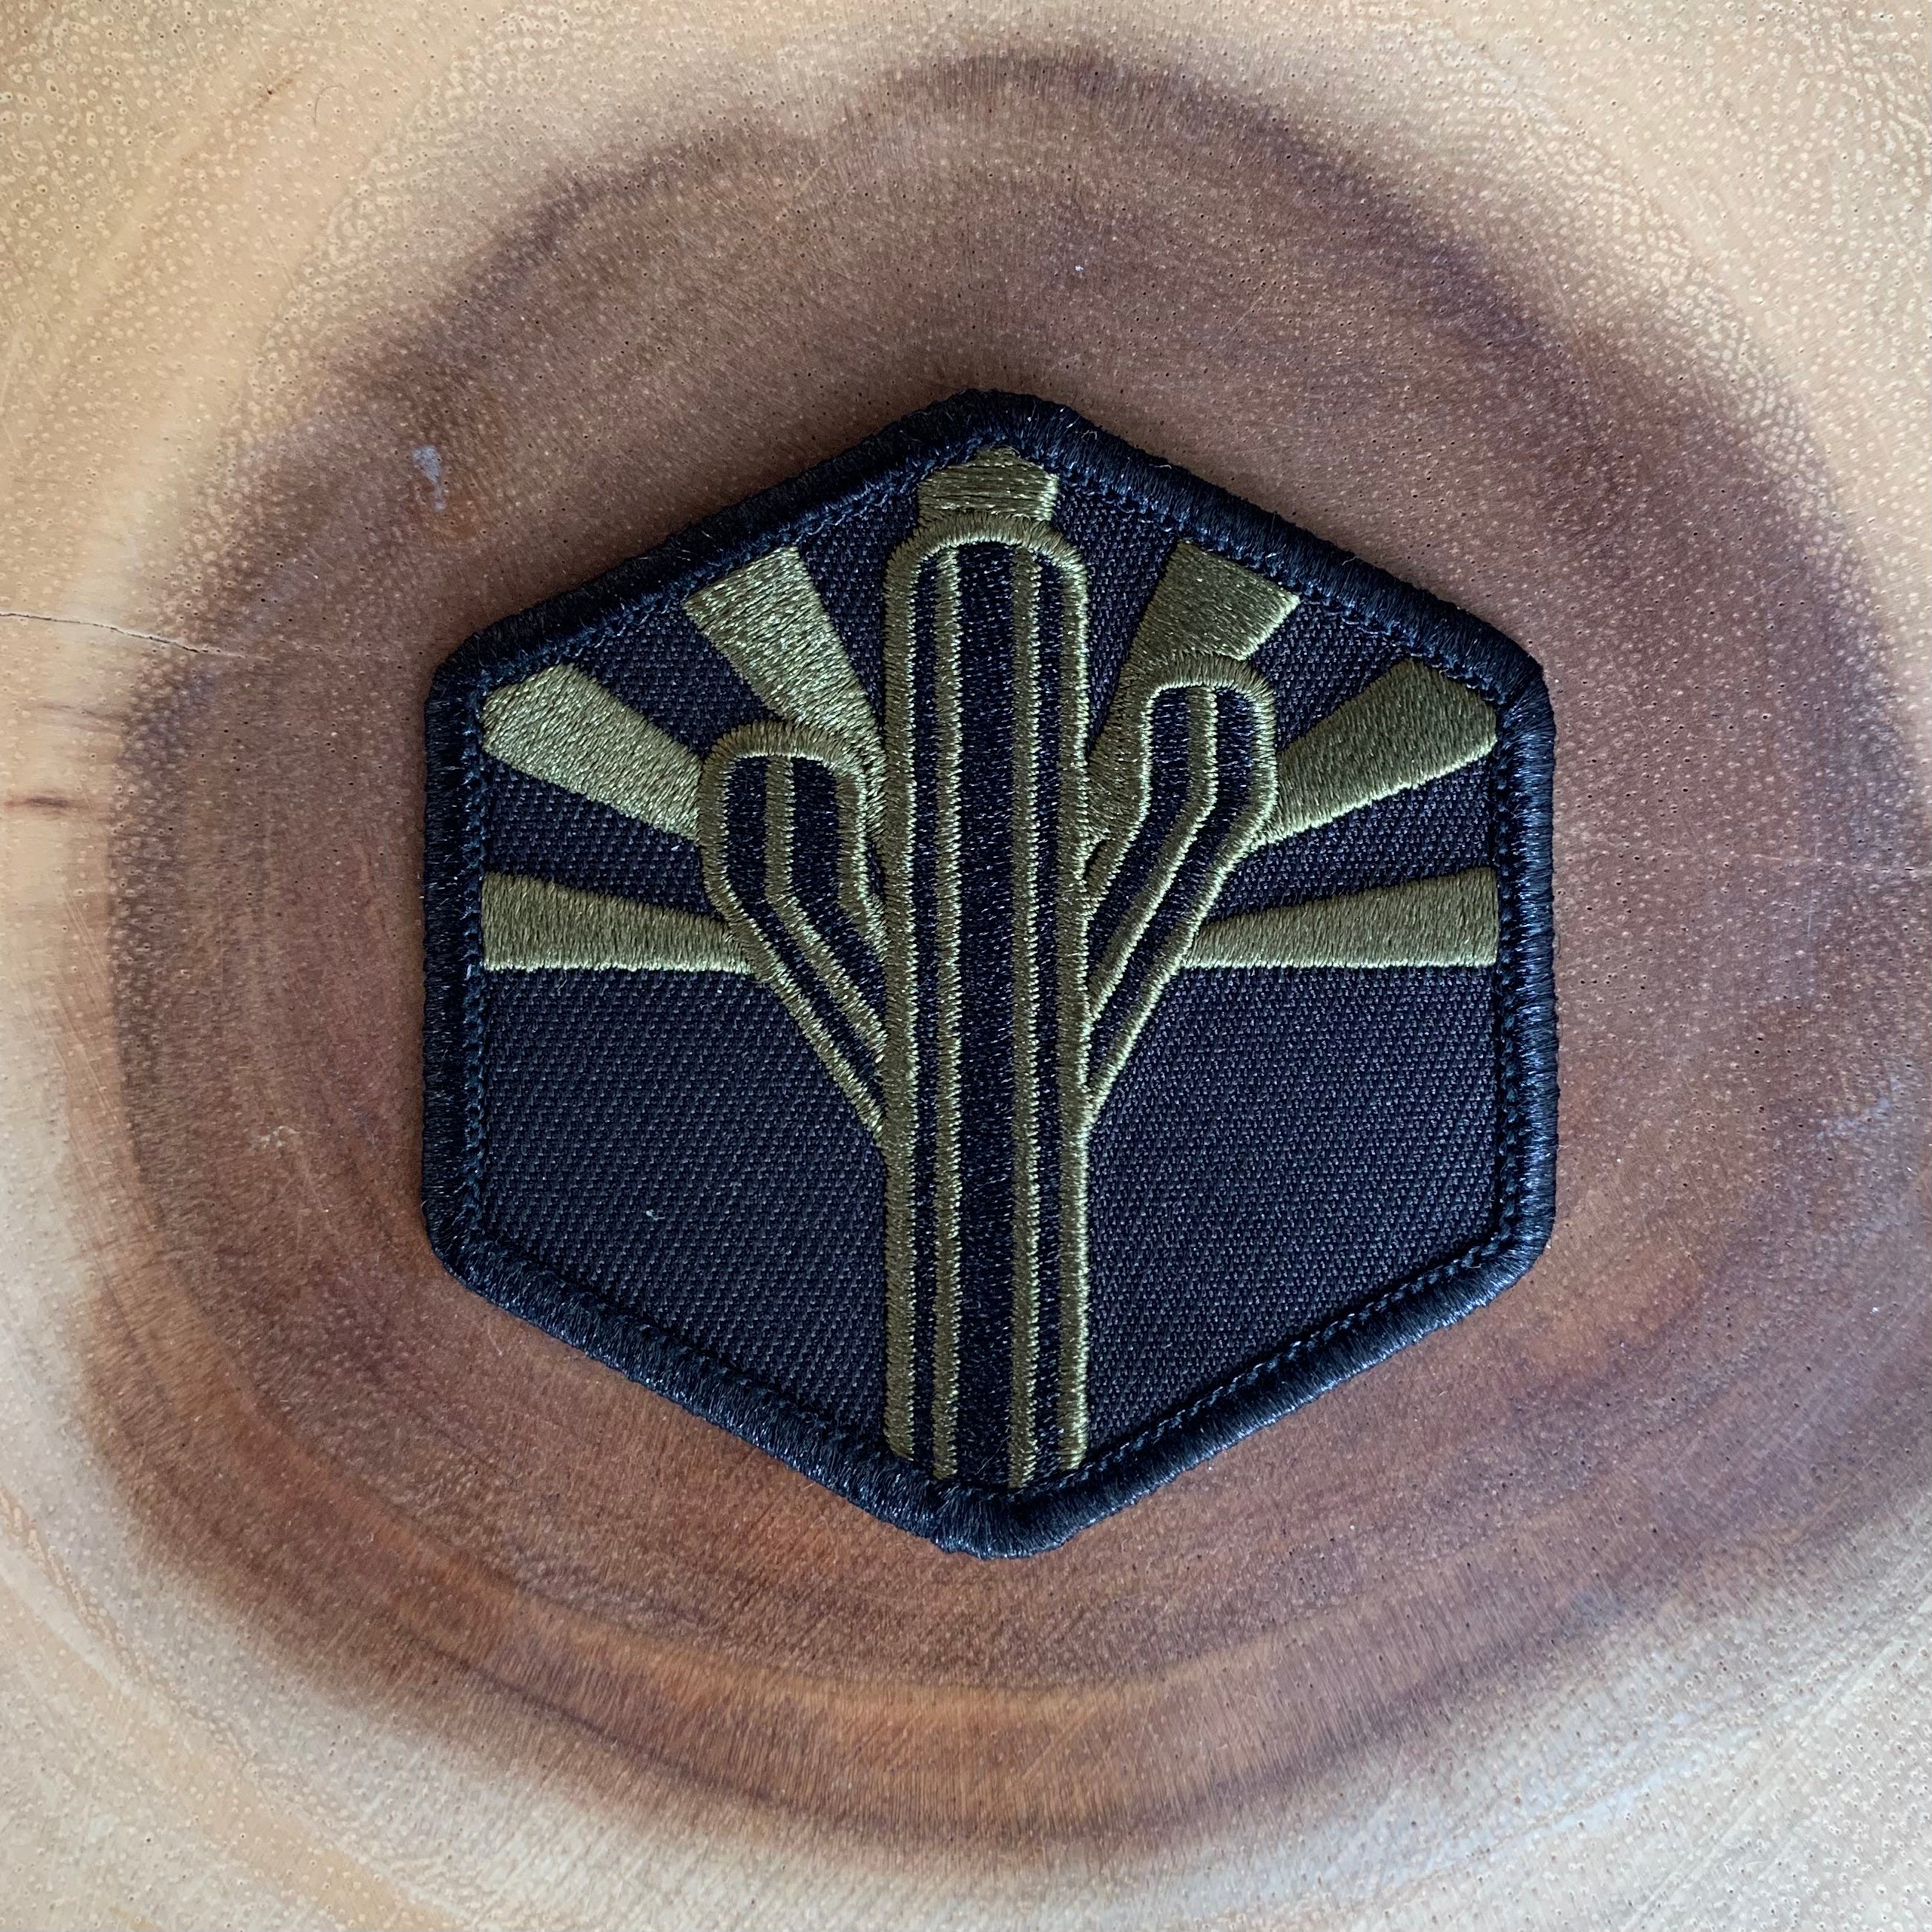 The Military Sentinel Patch